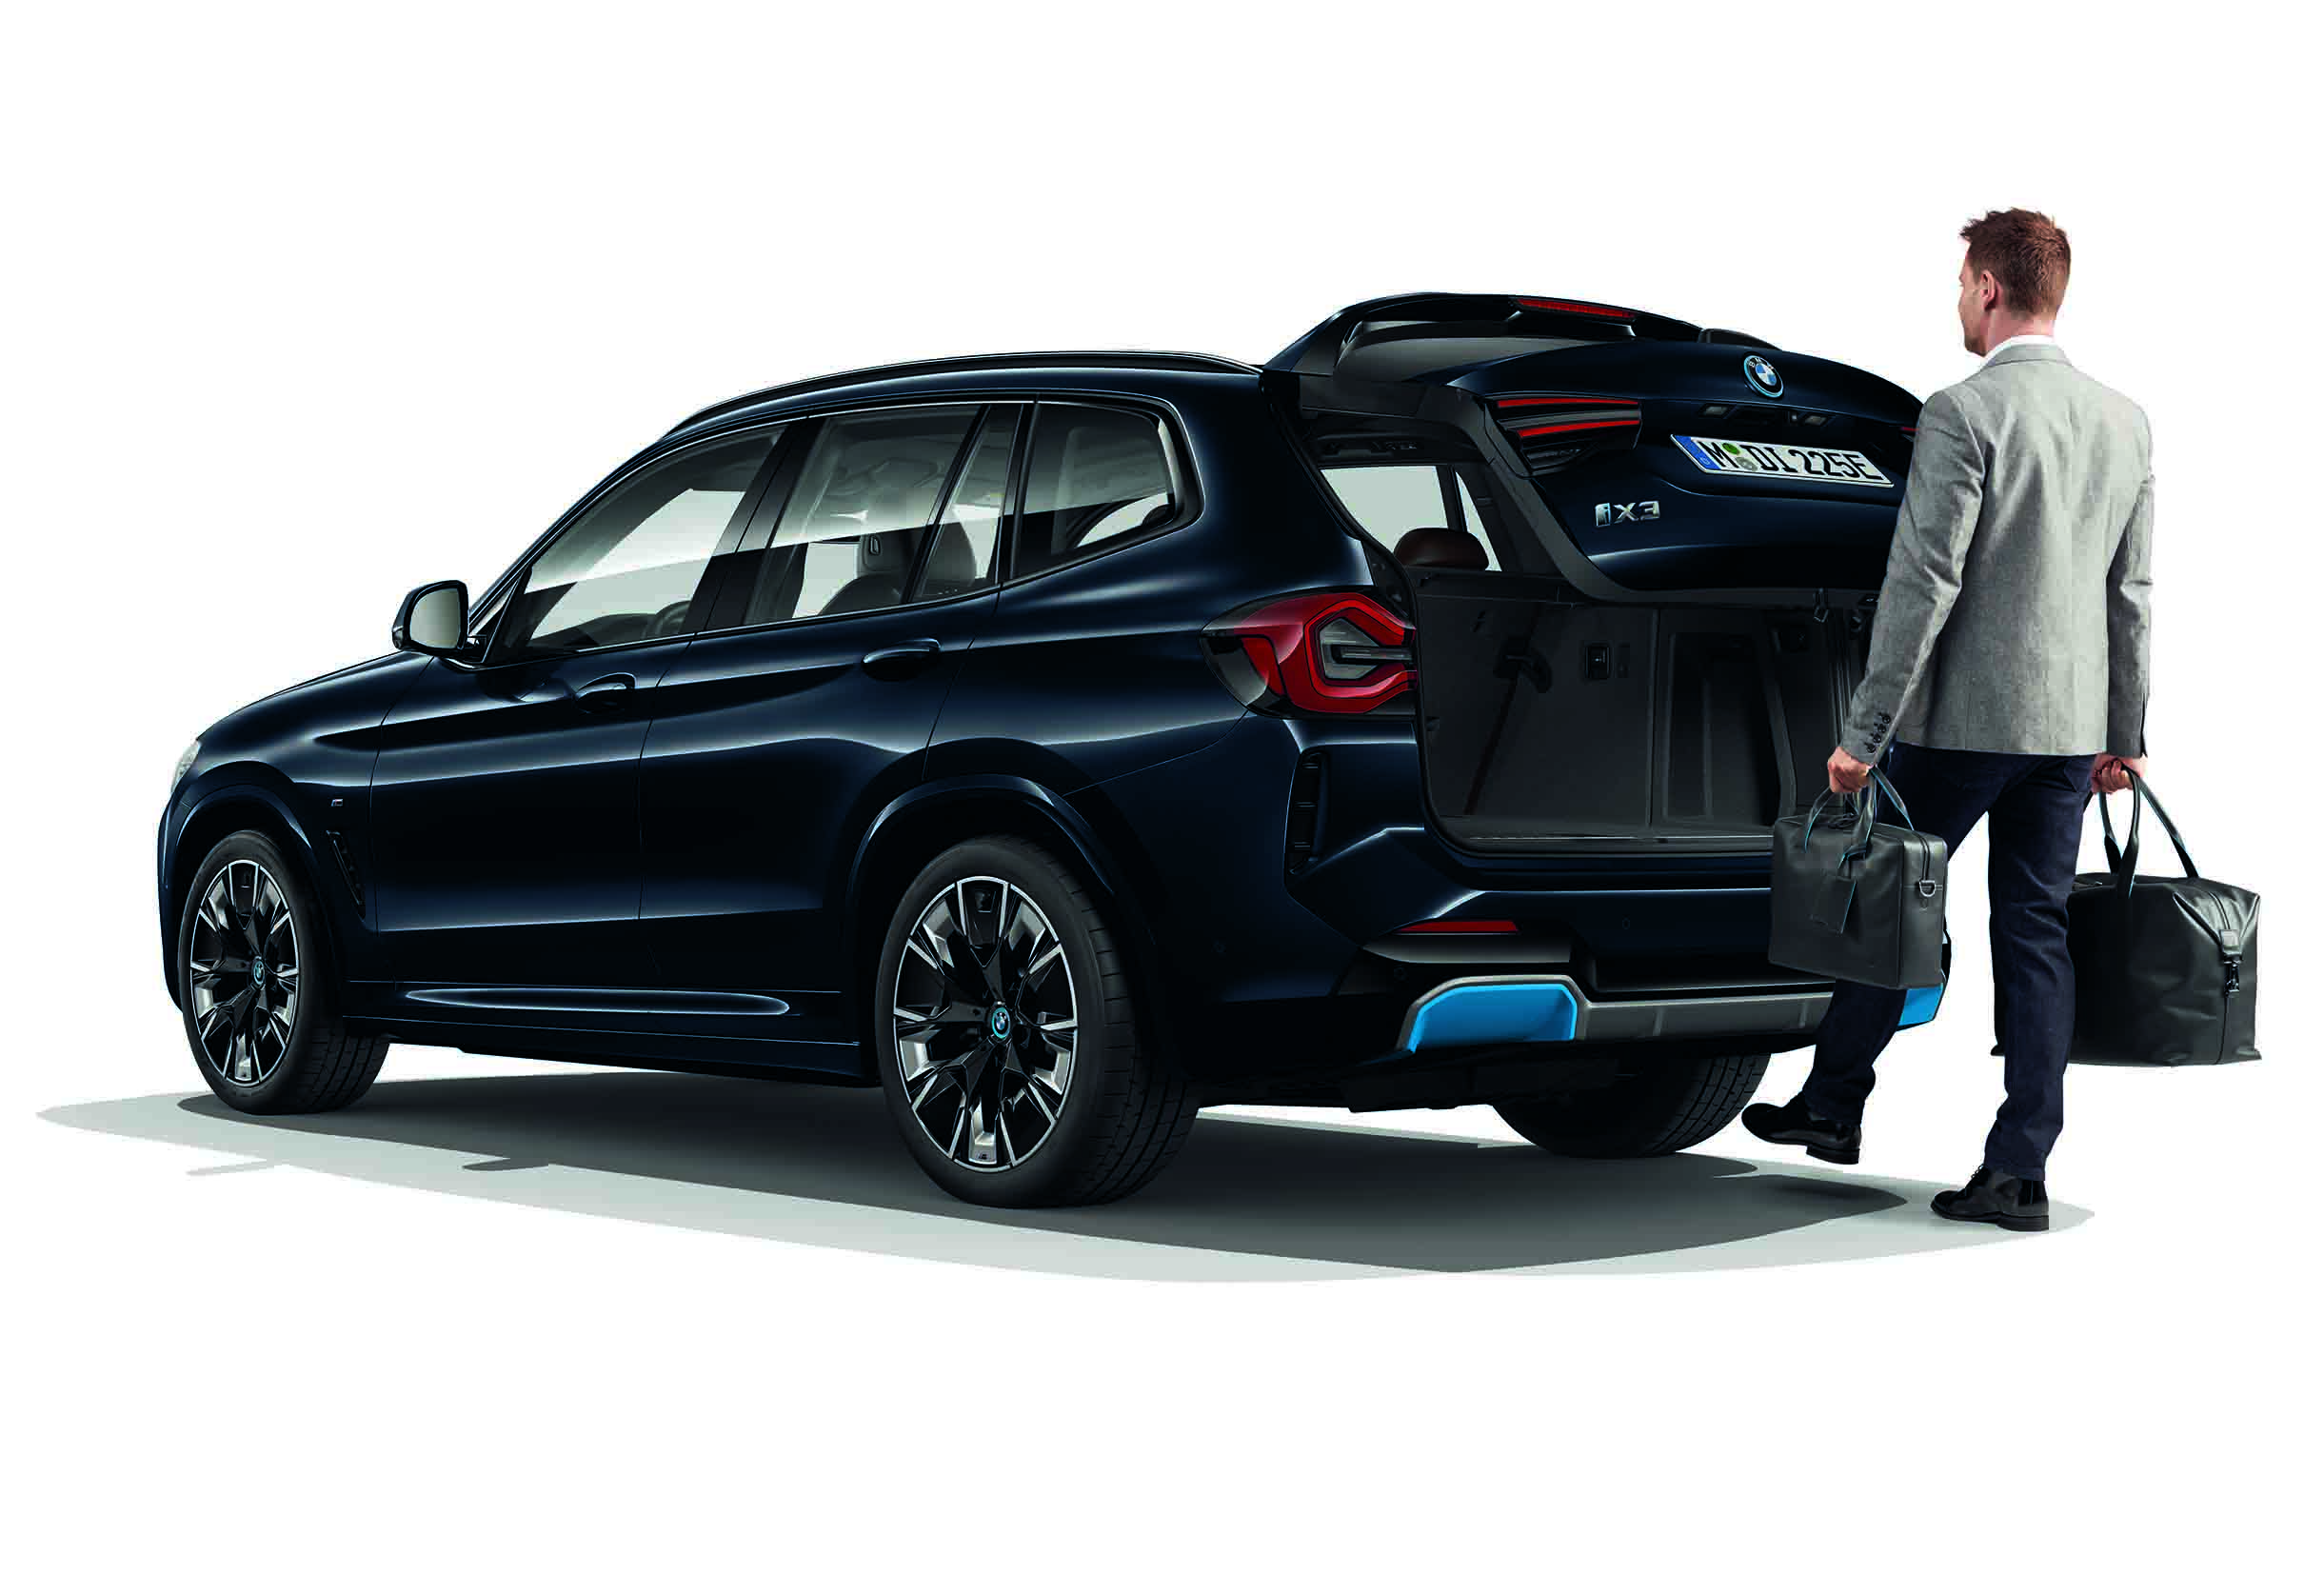 20. The First Ever BMW iX3